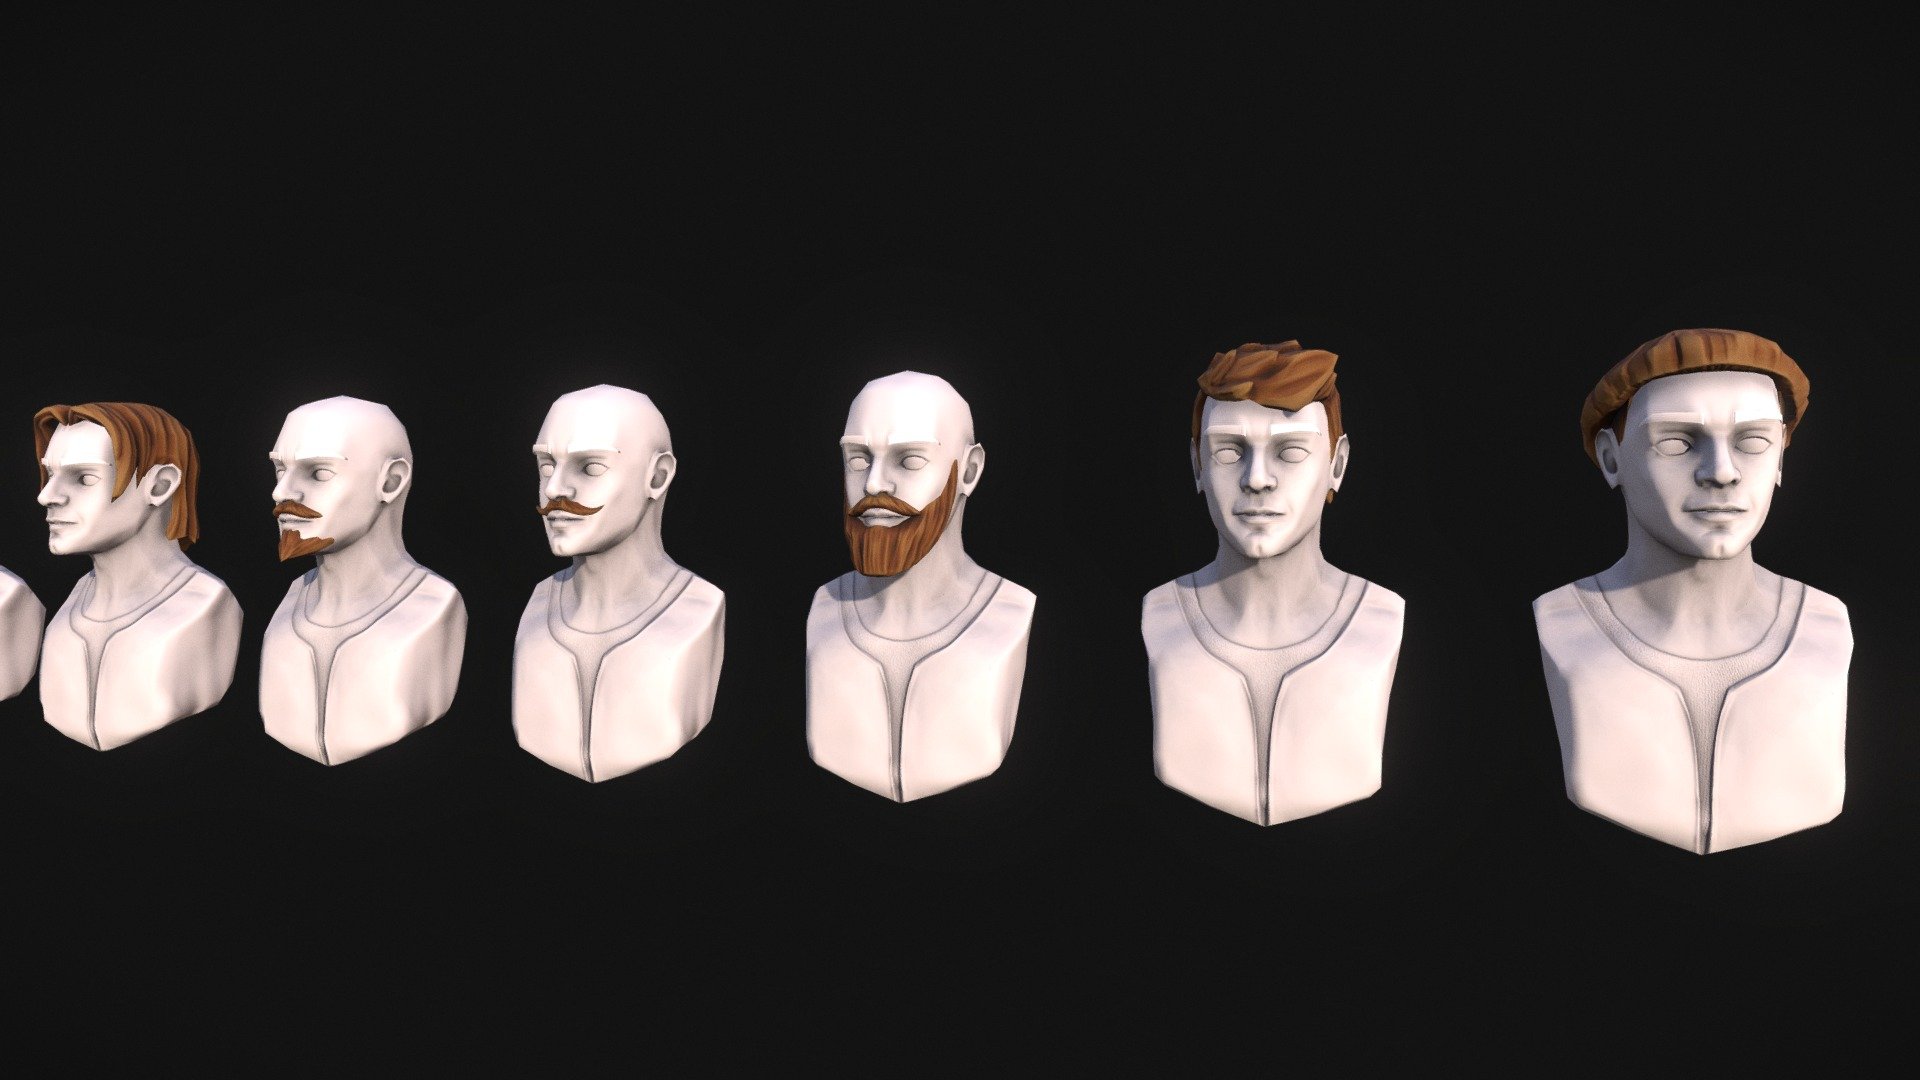 Collection of Hairs and Facial hairs for Cards and Tankards
https://store.steampowered.com/app/1506850/Cards__Tankards/ - Cards And Tankards - Hairstyles - 3D model by Seyquil (@Leyde) 3d model